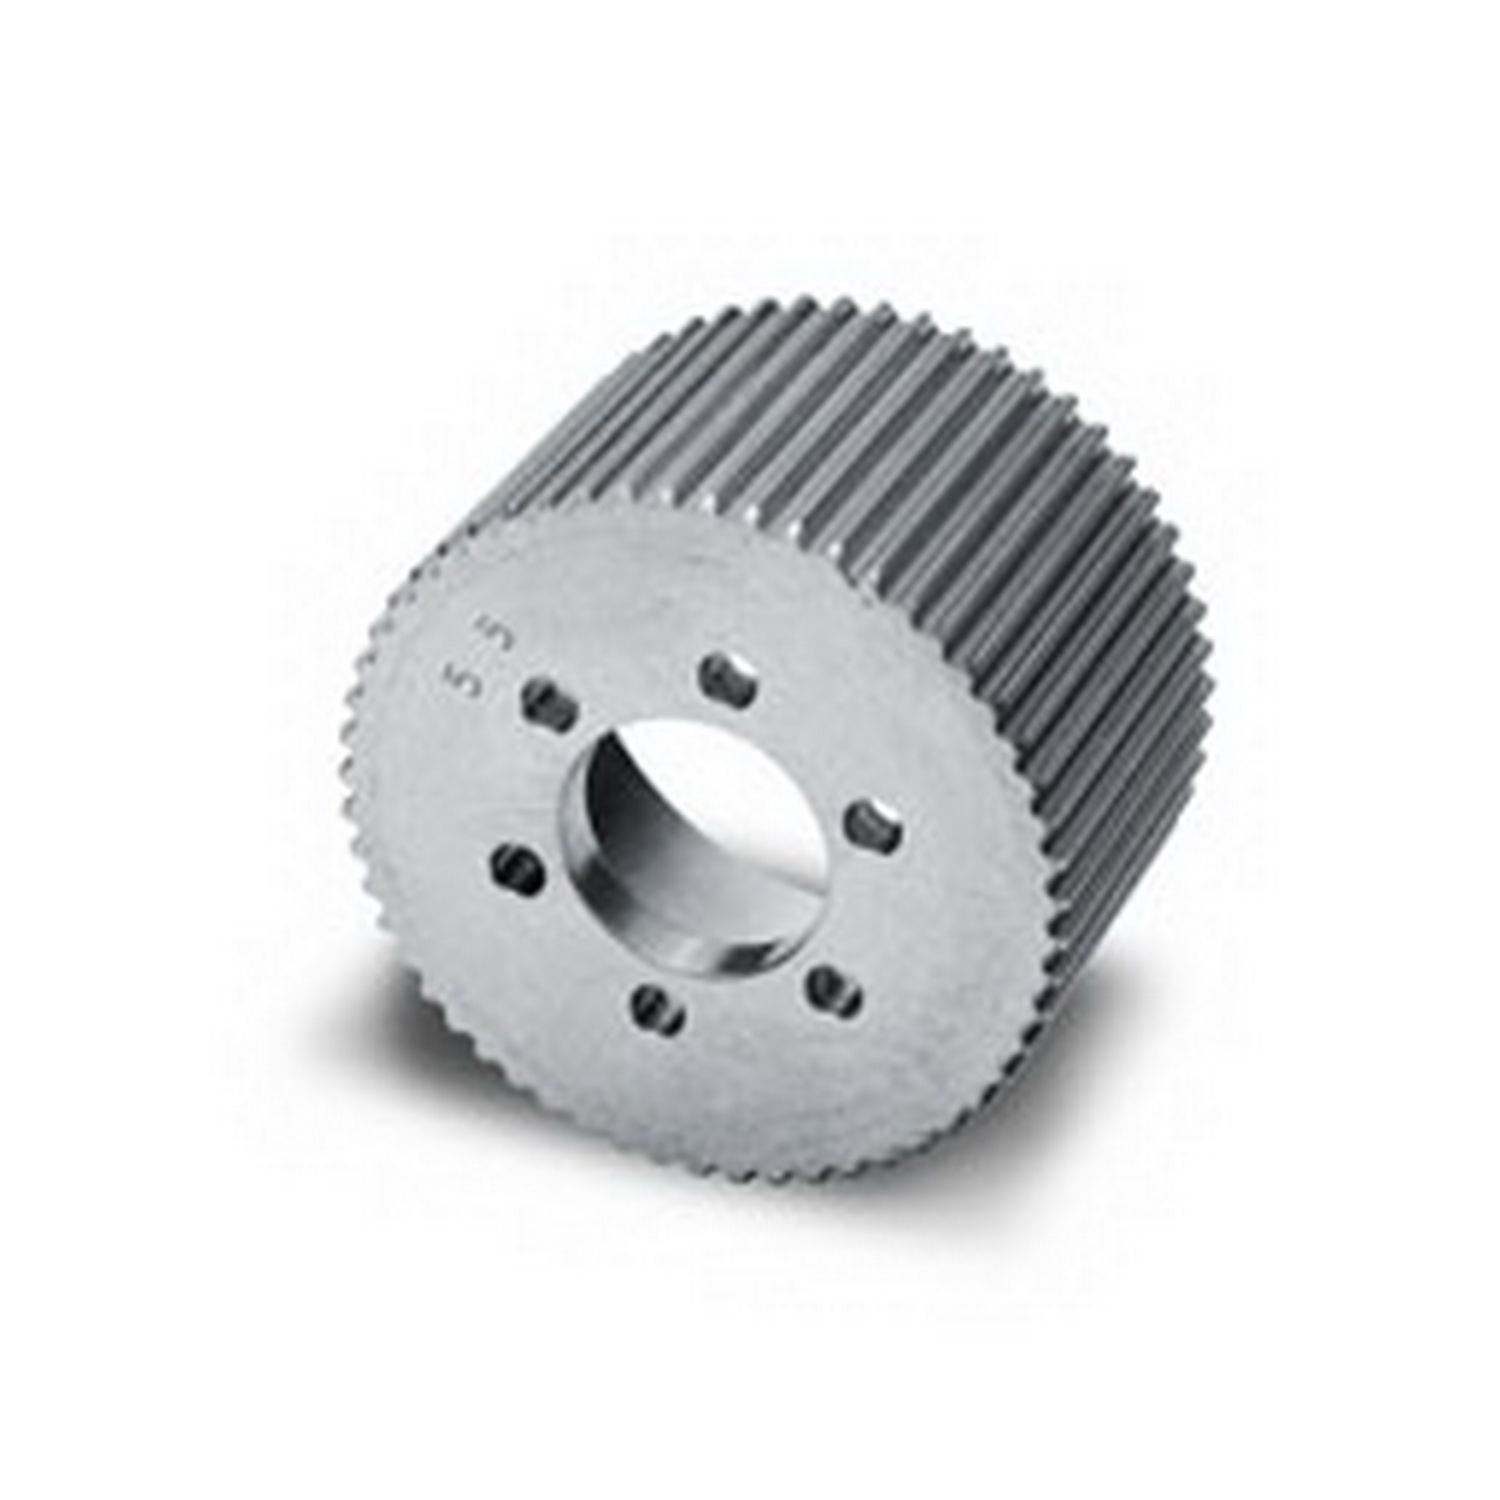 Weiand Weiand 7109-54 8mm Pitch Drive Pulley